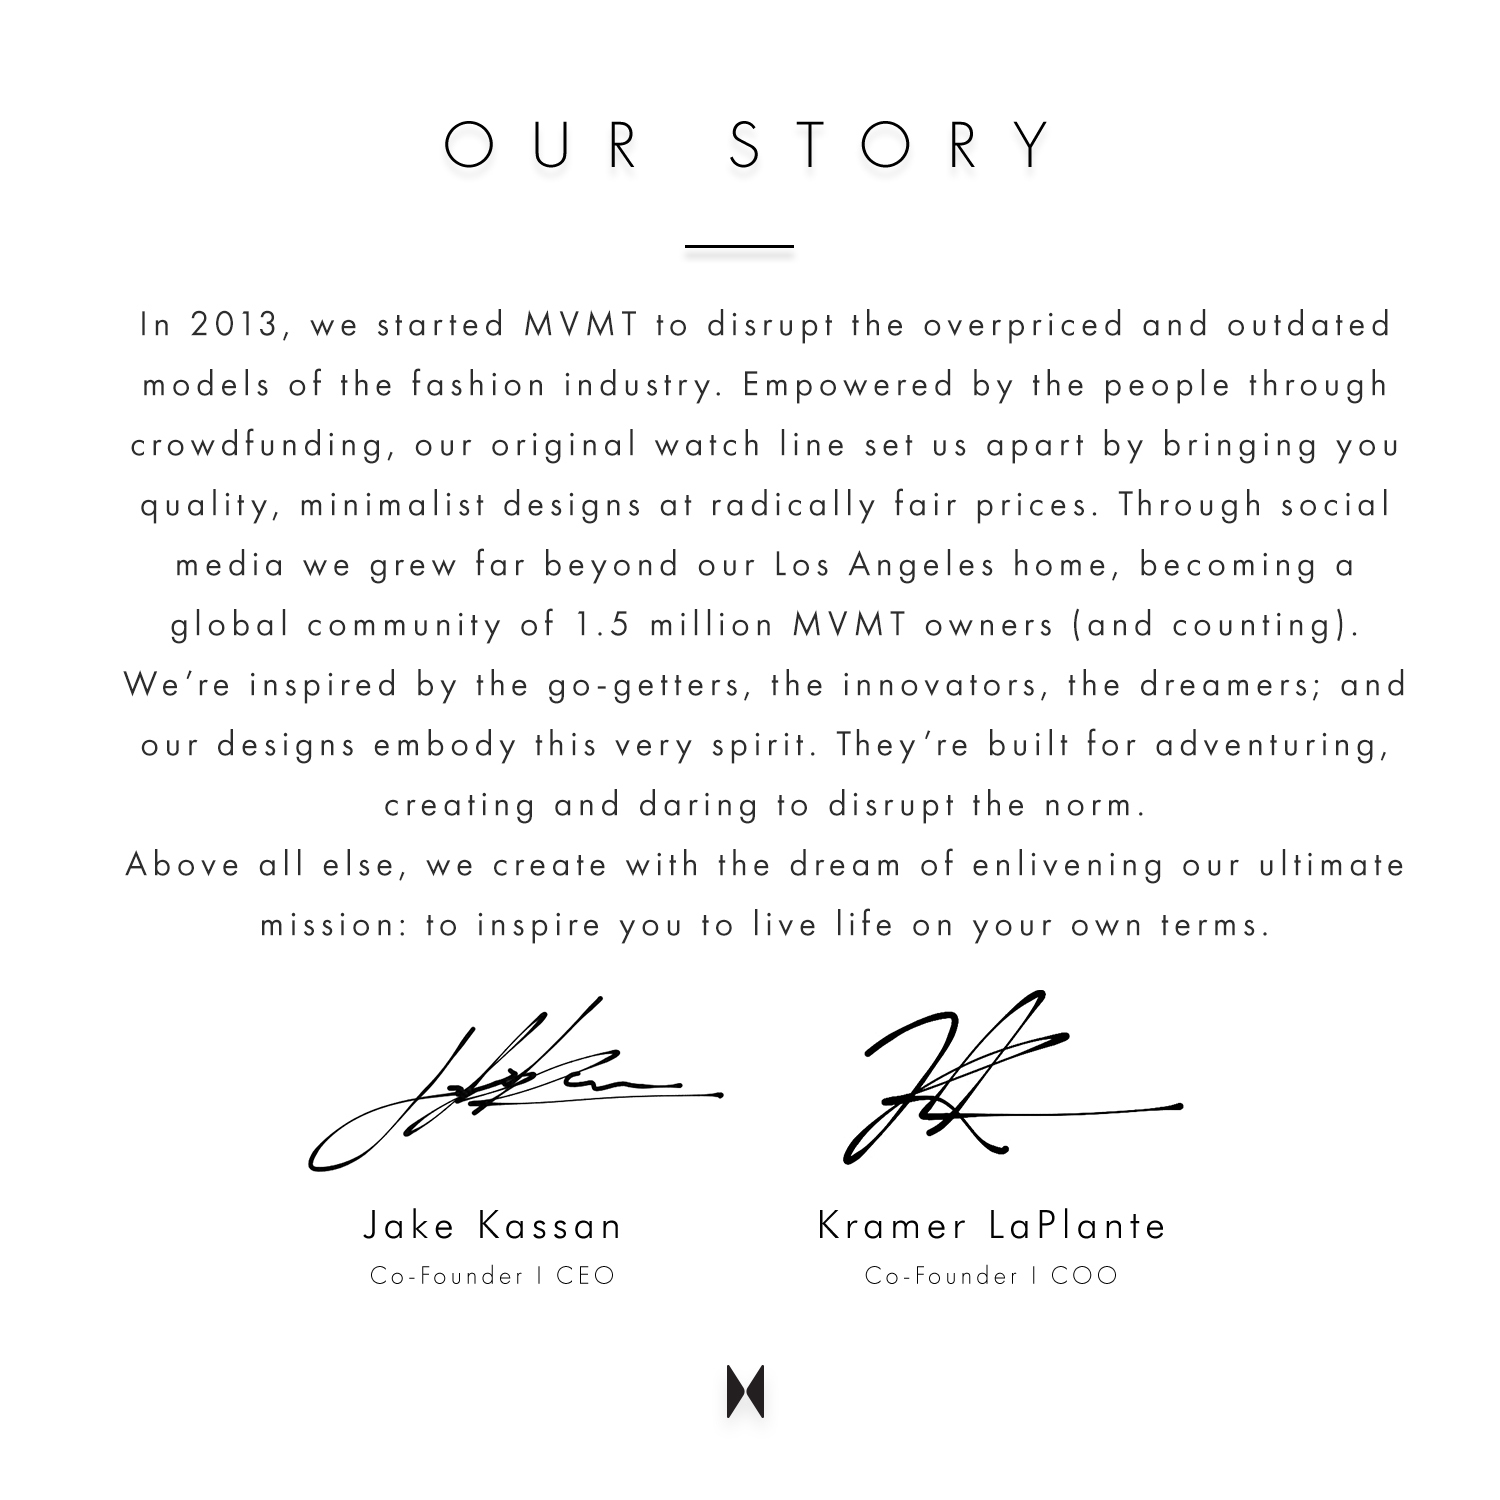 Our story. In 2013, we started MVMT to disrupt the overpriced and outdated models of the fashion industry. Empowered by the people through crowdfunding, our original watch line set us apart by bringing you quality, minimalist designs at radically fair prices. Through social media we grew far beyond our Los Angeles home, becoming a global community of 1.5 million MVMT owners (and counting). We're inspired by the go-getters, the innovators, the dreamers; and our designs embody this very spirit. They're built for adventuring, creating and daring to disrupt the norm. Above all else, we create with the dream of enlivening our ultimate mission: to inspire you to live life on your own terms. Jake Kassan Co-founder | CEO. Kramer LaPlante Co-founder COO